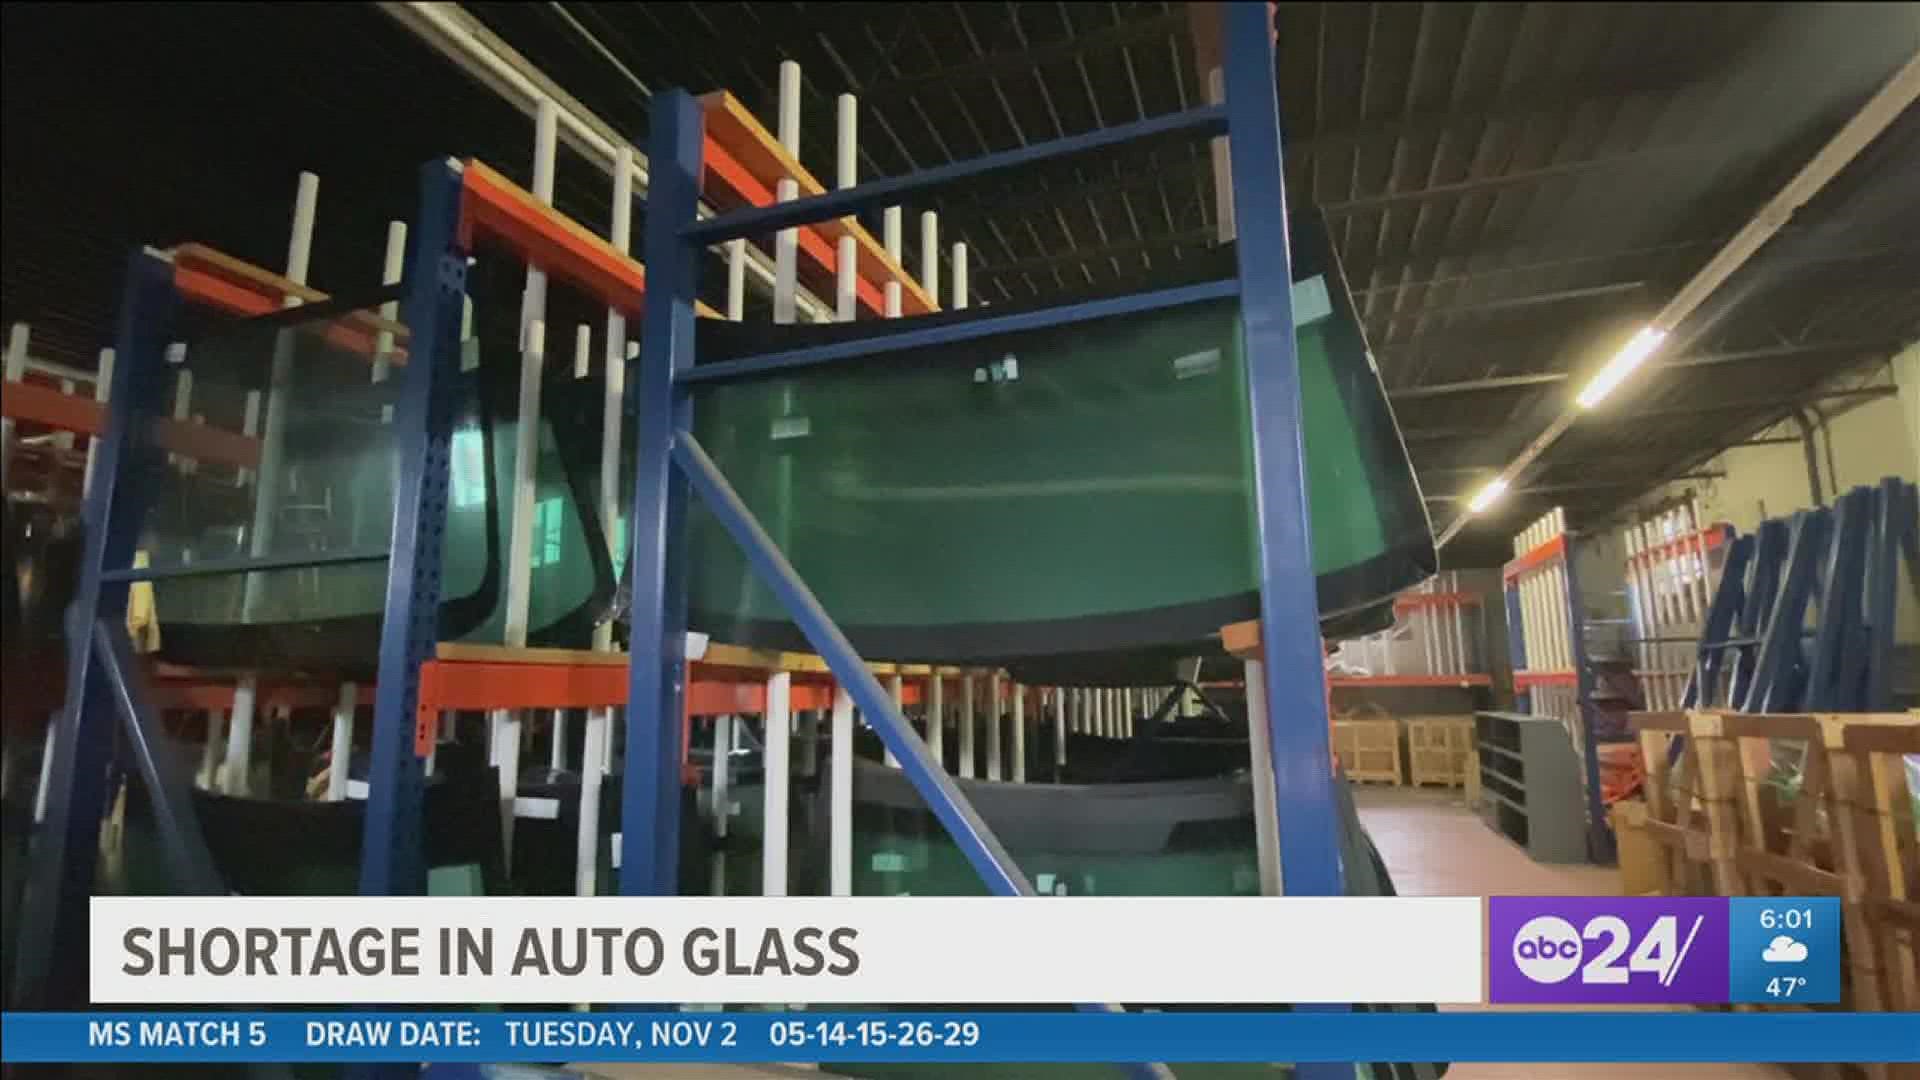 A national glass shortage means delays and increased costs for auto glass repairs.